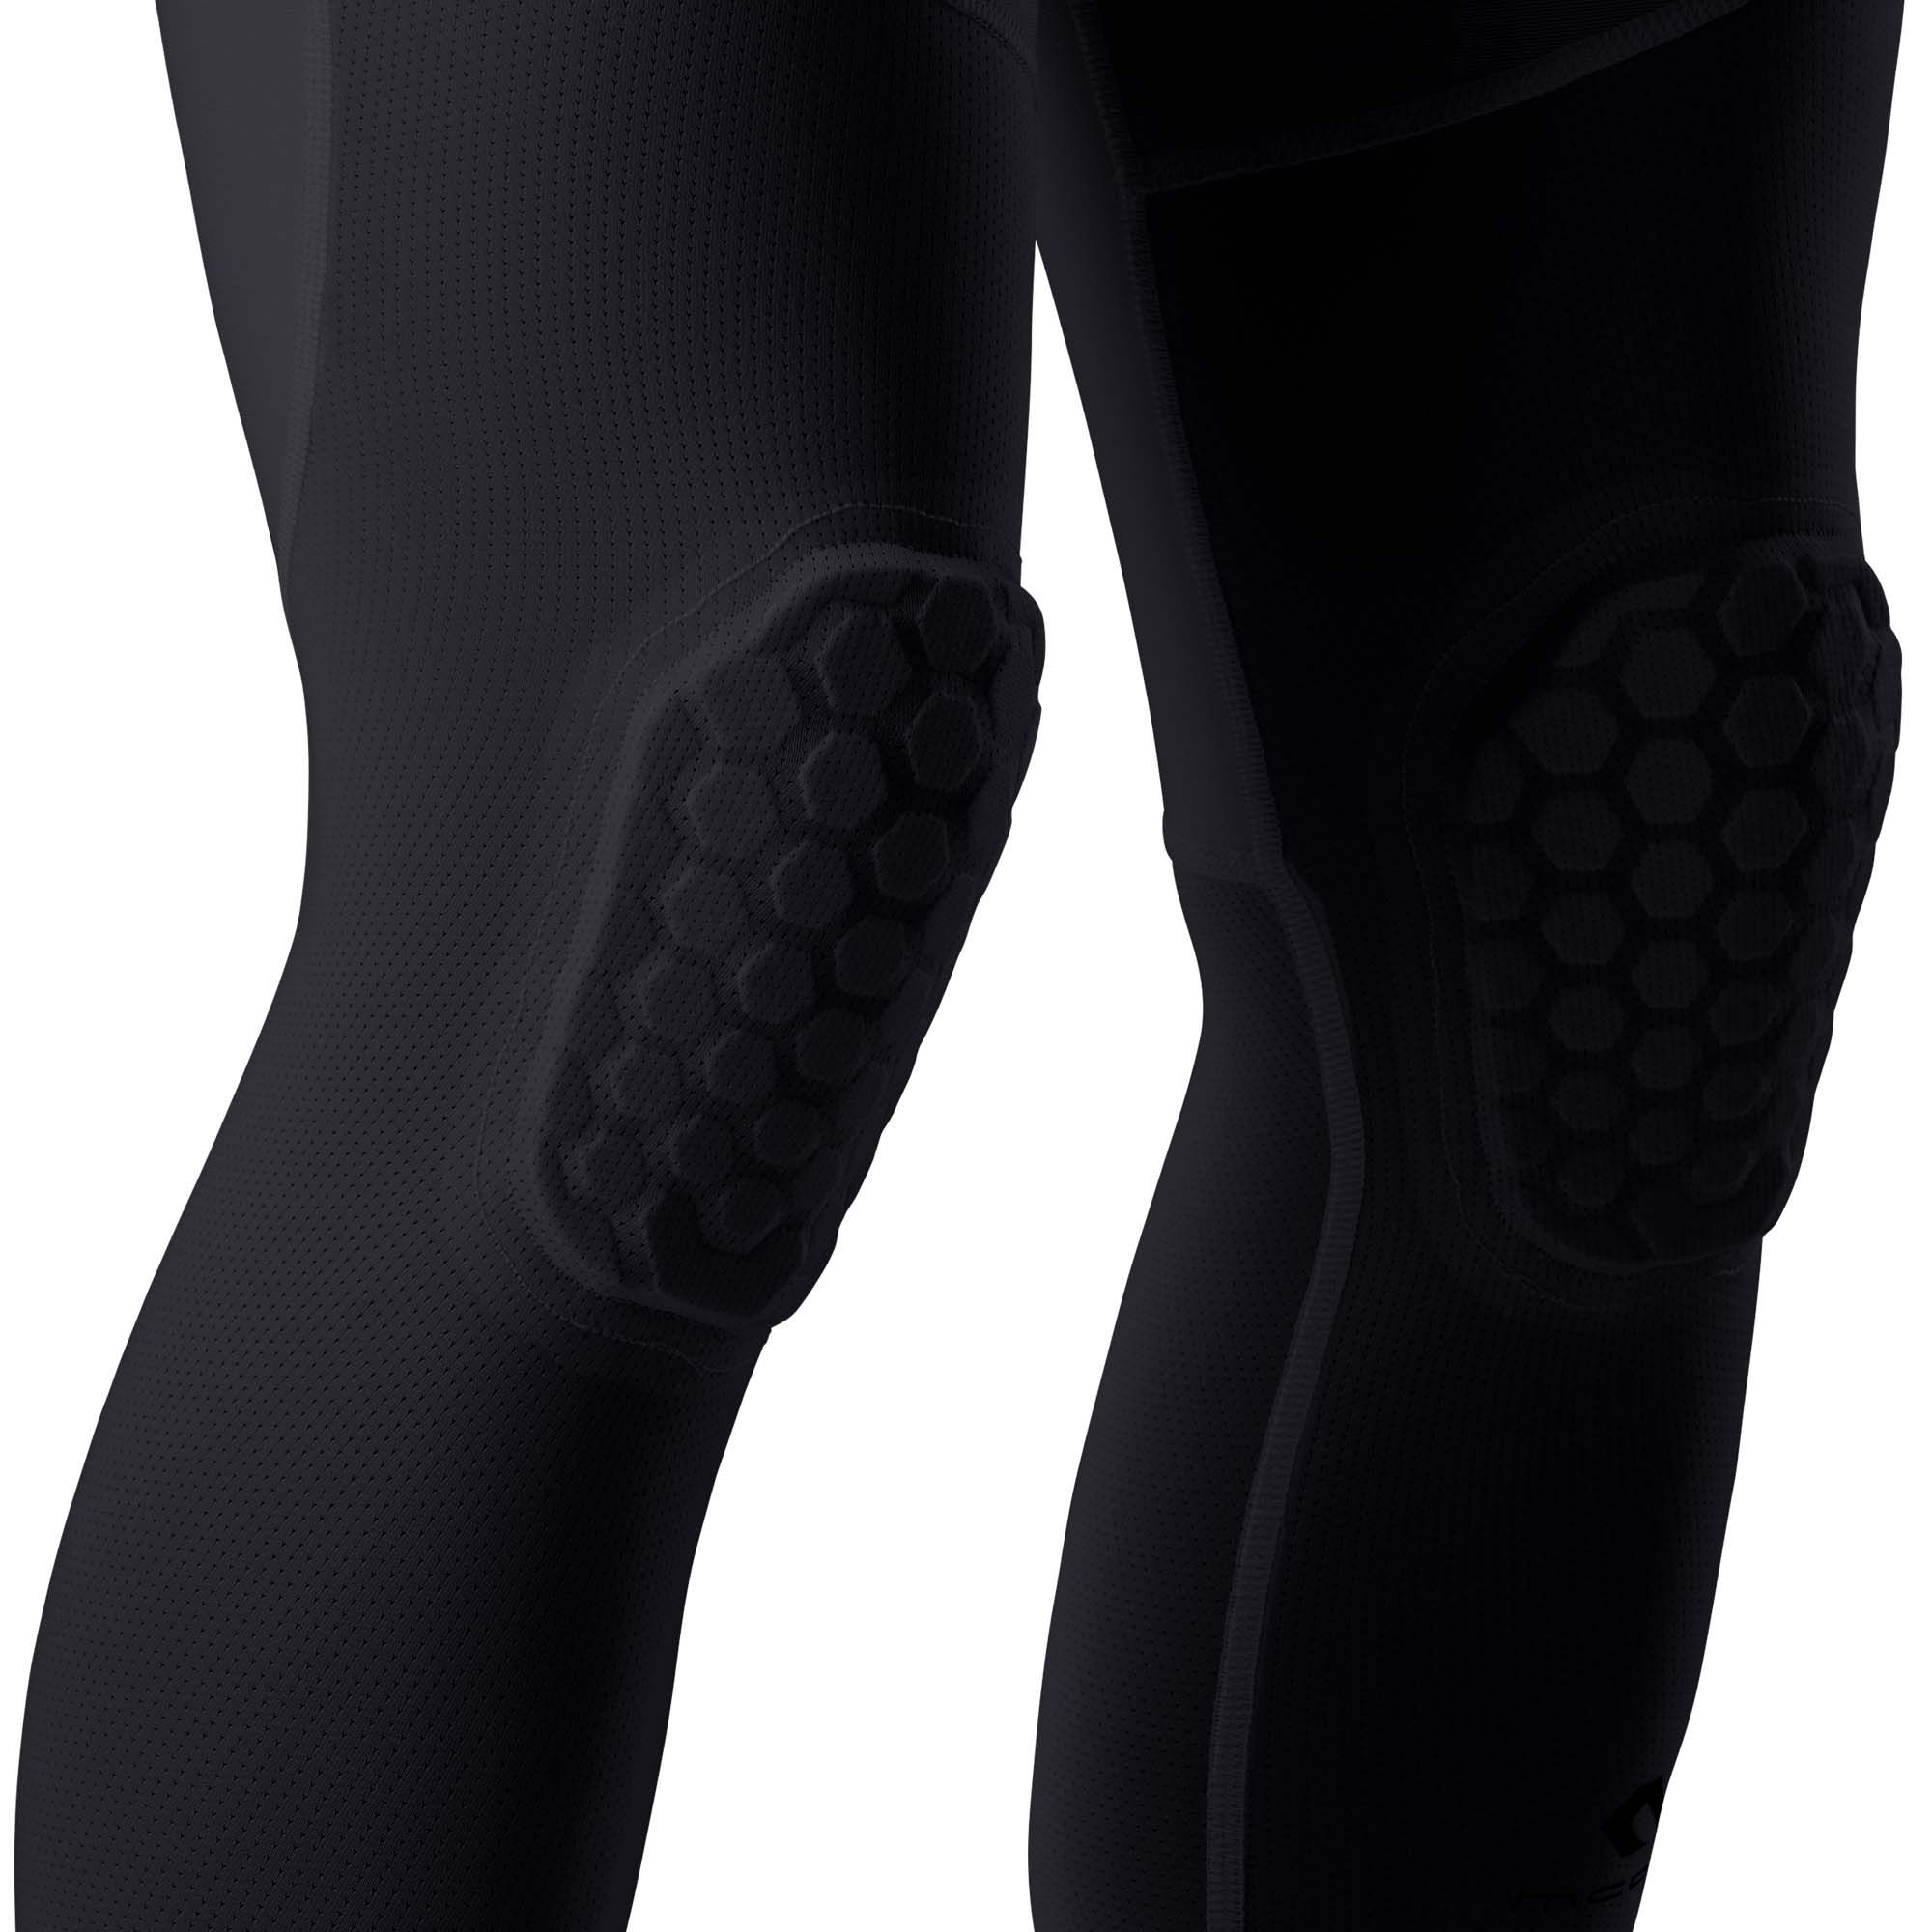 Compression 34 Tights  DICK's Sporting Goods